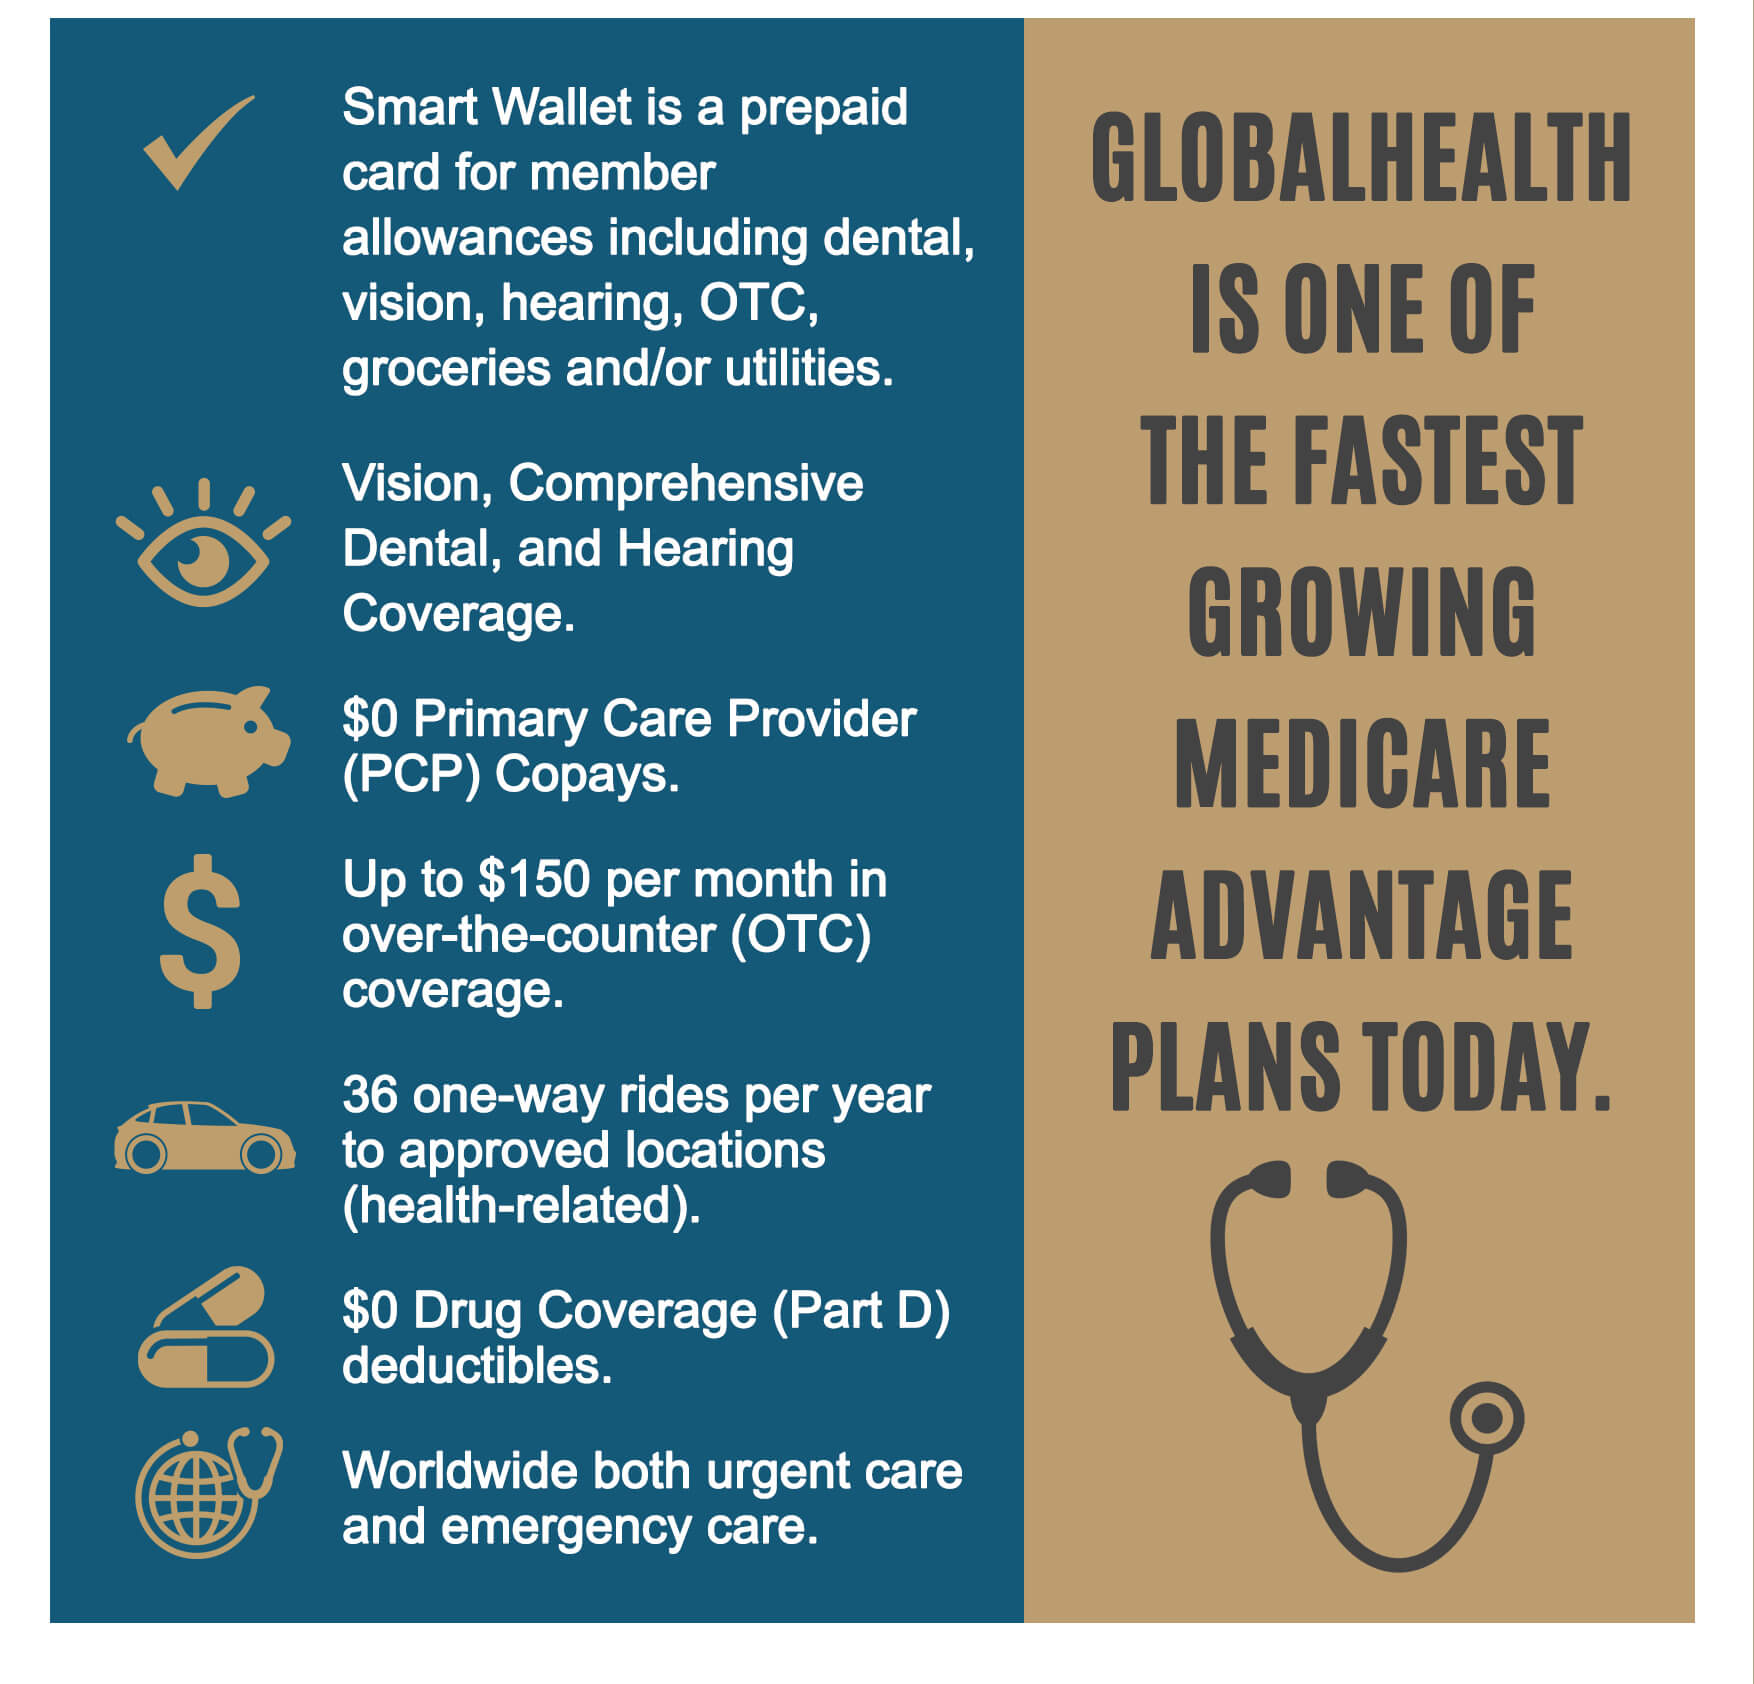 One of the fastest growing Medicare Advantage plans today!